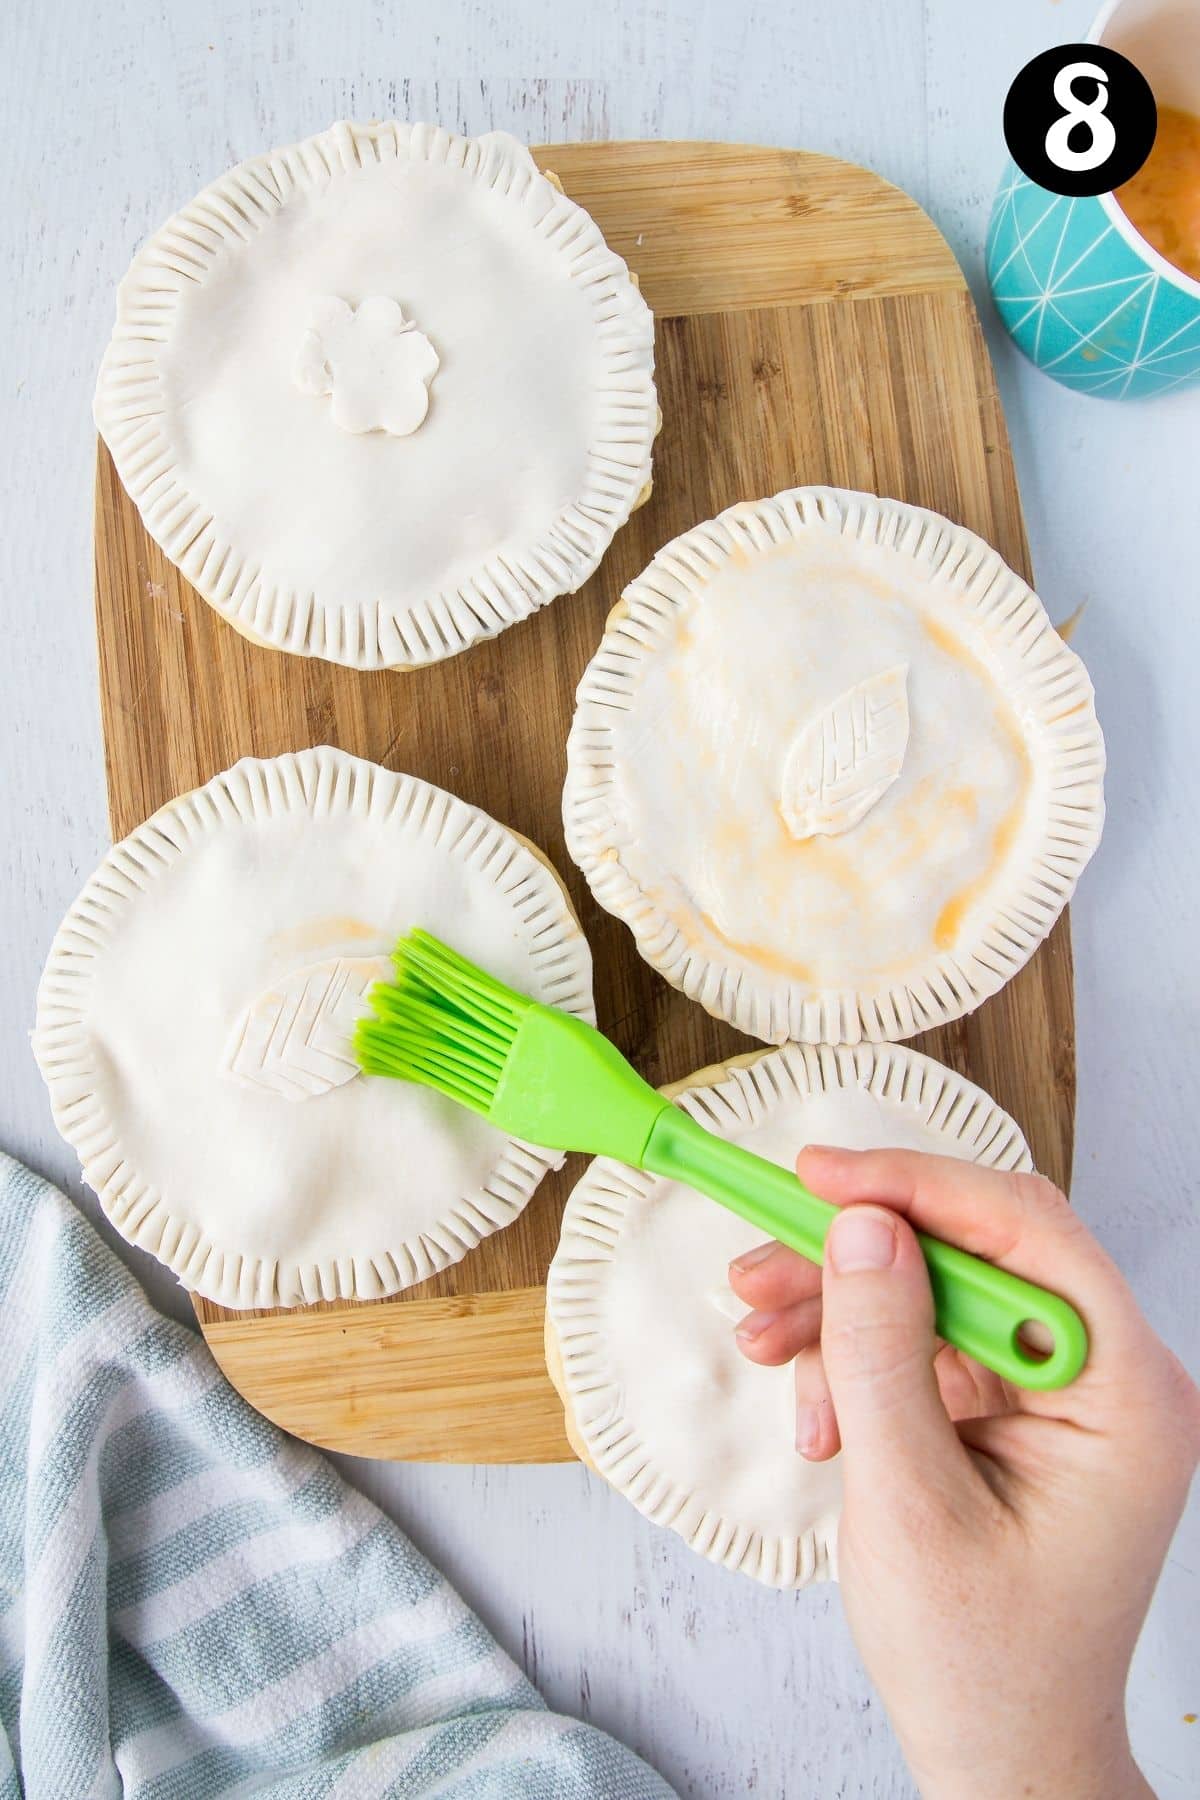 a hand brushing egg wash over uncooked pies